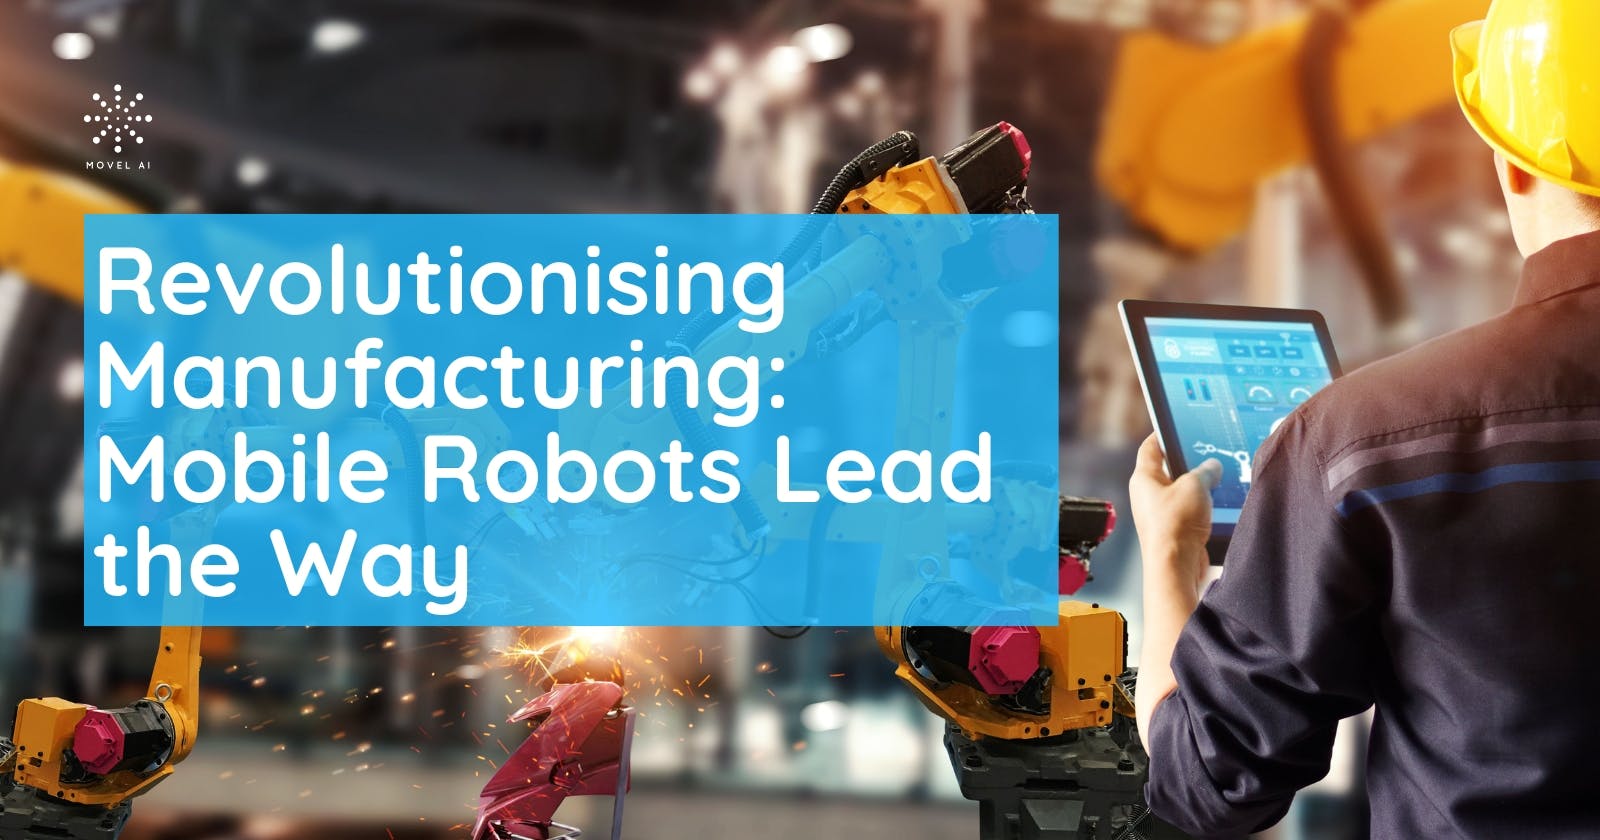 Revolutionising Manufacturing: Mobile Robots Lead the Way